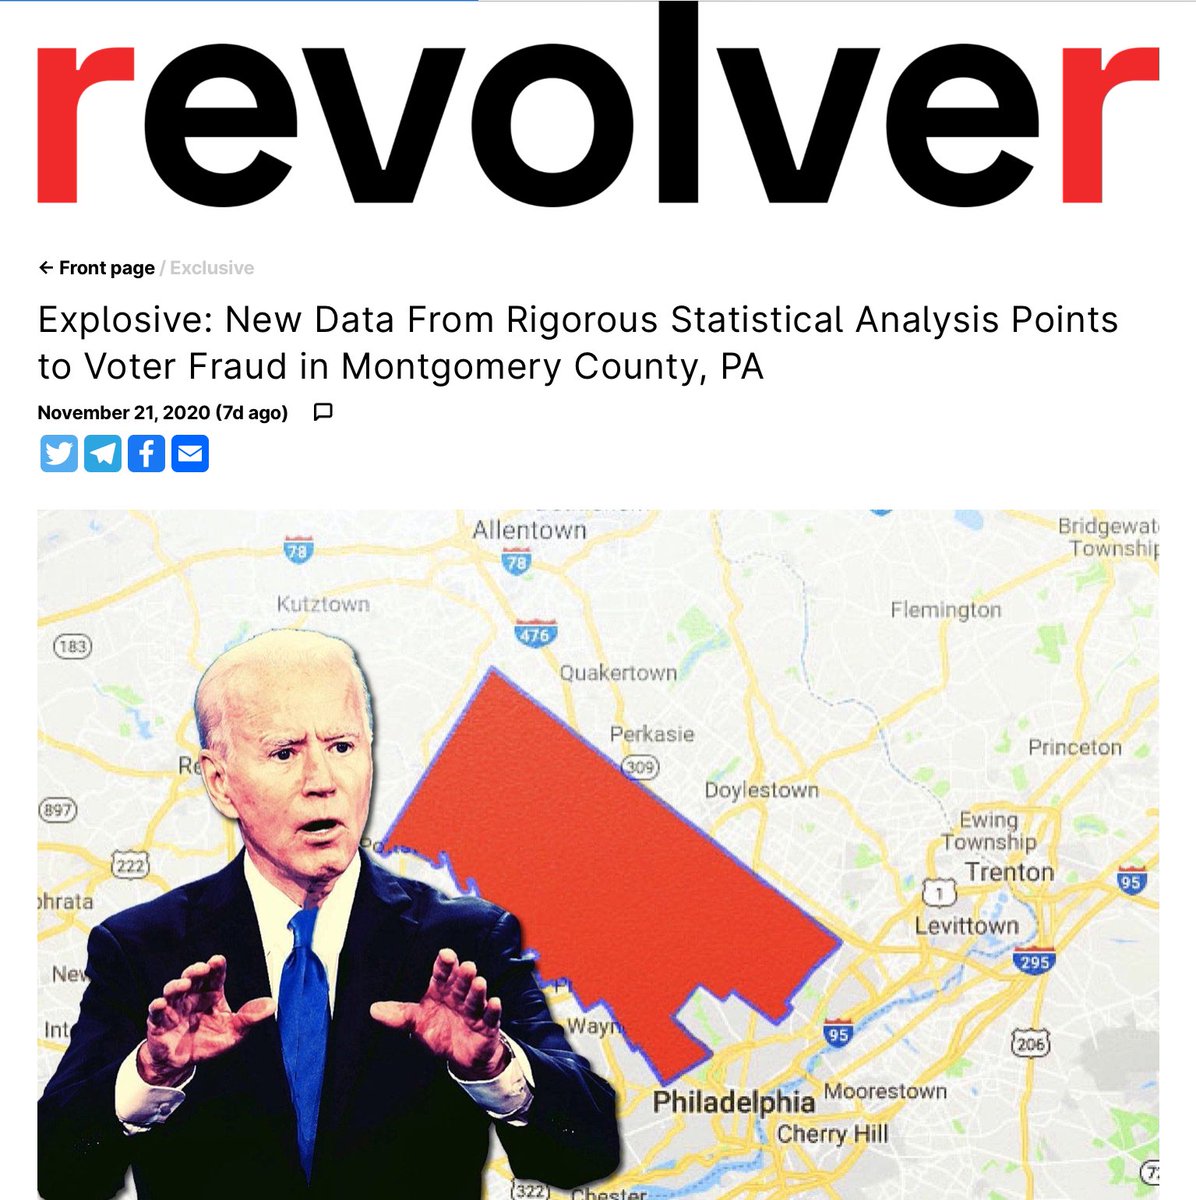 “Considerable evidence consistent w/possibility of electoral fraud in vote counts: Montgomery County, PA..11/5/20 9:09am: Large batch of 90,022 mail/absentee votes get added = over 95% support for Biden, total votes go up by only 9,534.. @SidneyPowell1 https://www.revolver.news/2020/11/explosive-new-data-from-rigorous-statistical-analysis-points-to-voter-fraud-in-montgomery-county-pa/